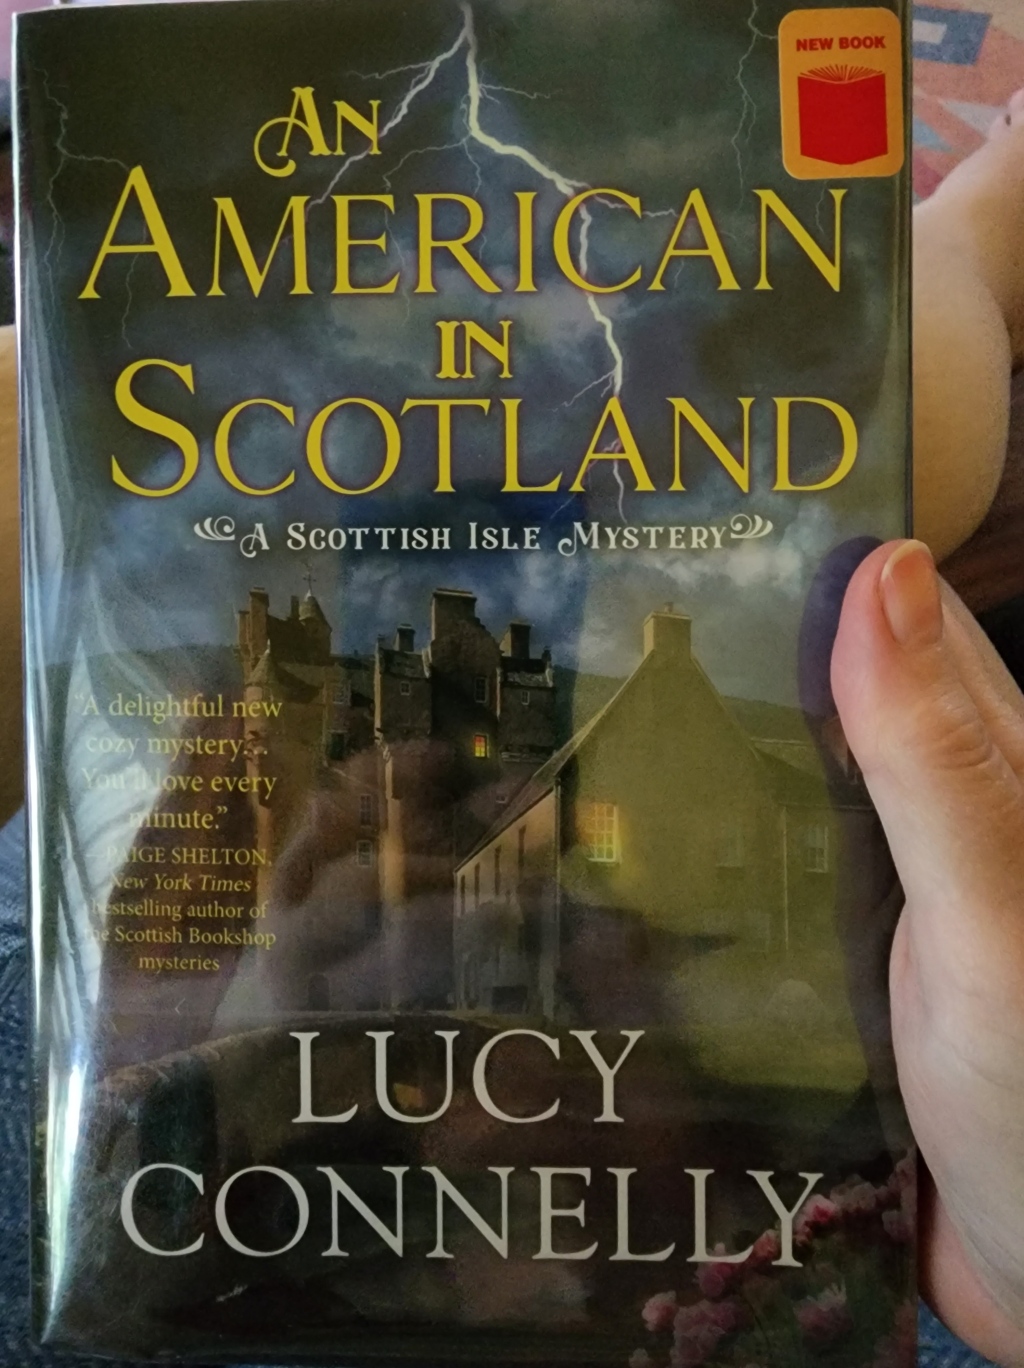 An American in Scotland by Lucy Connelly